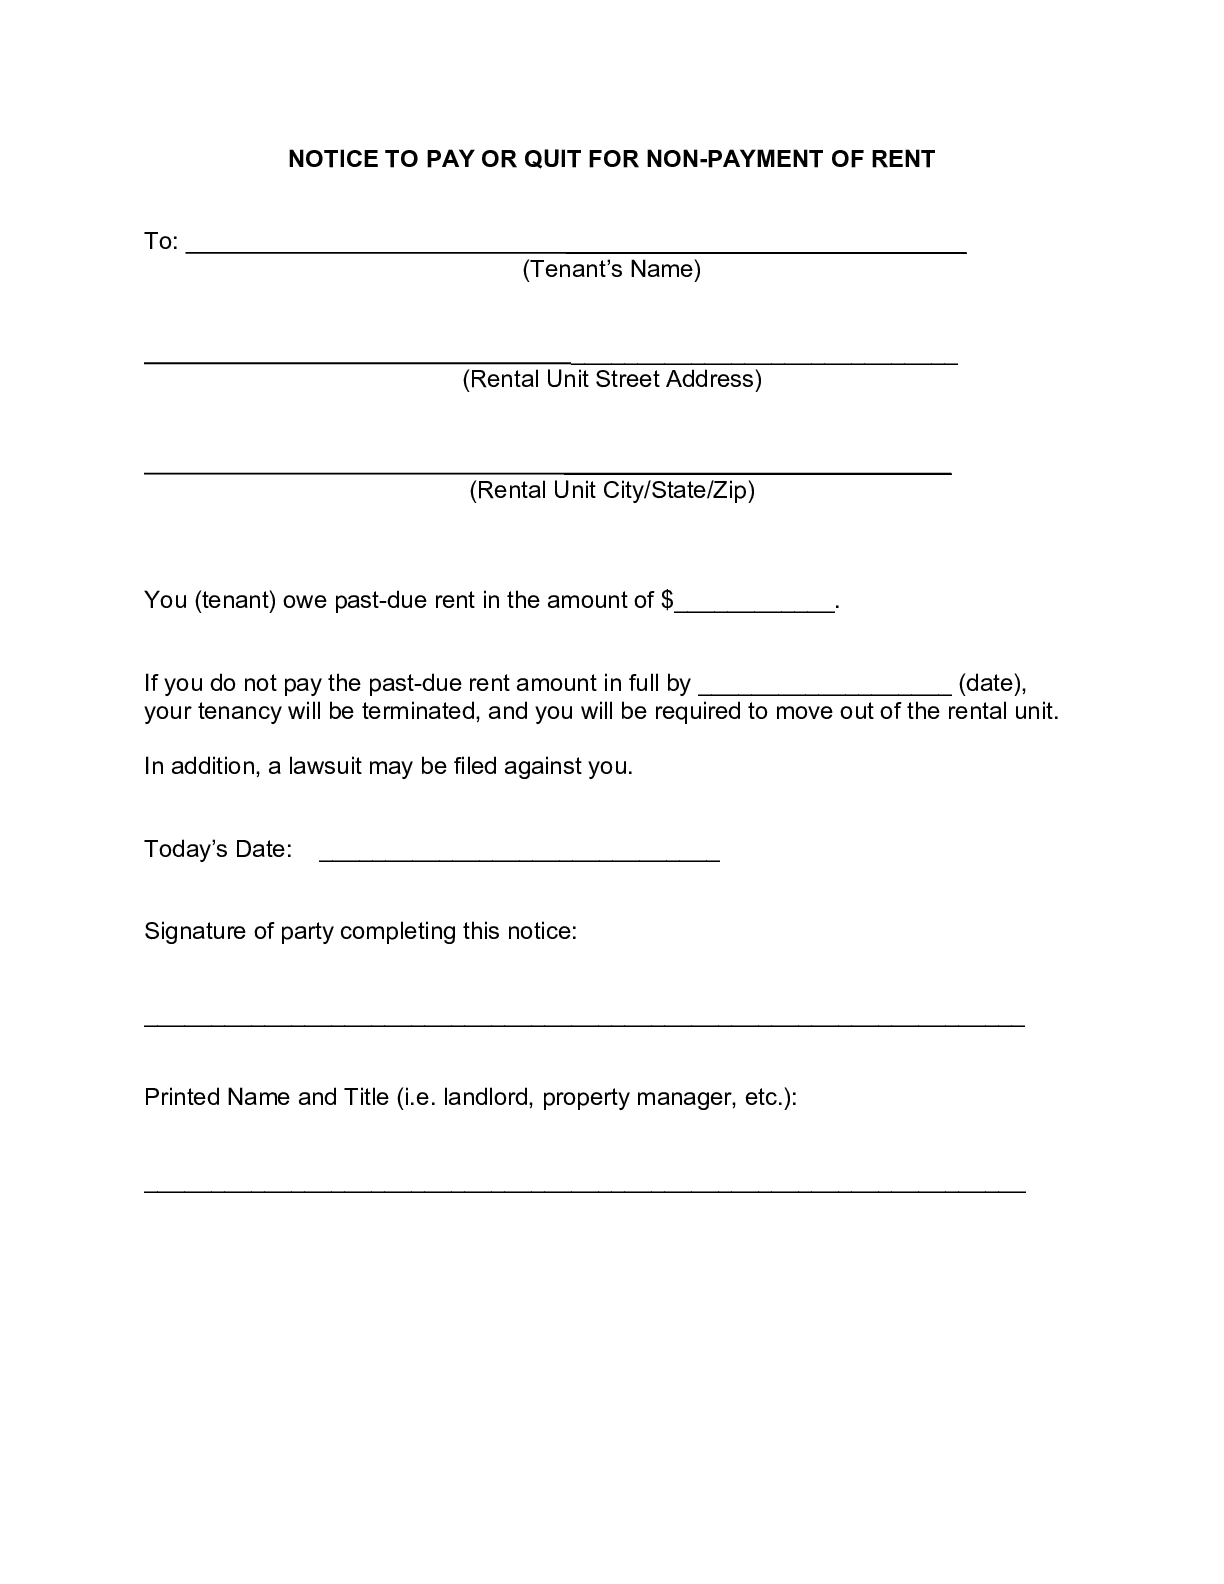 FREE Tennessee Eviction Notice Form [8]: ALL Legal Reasons